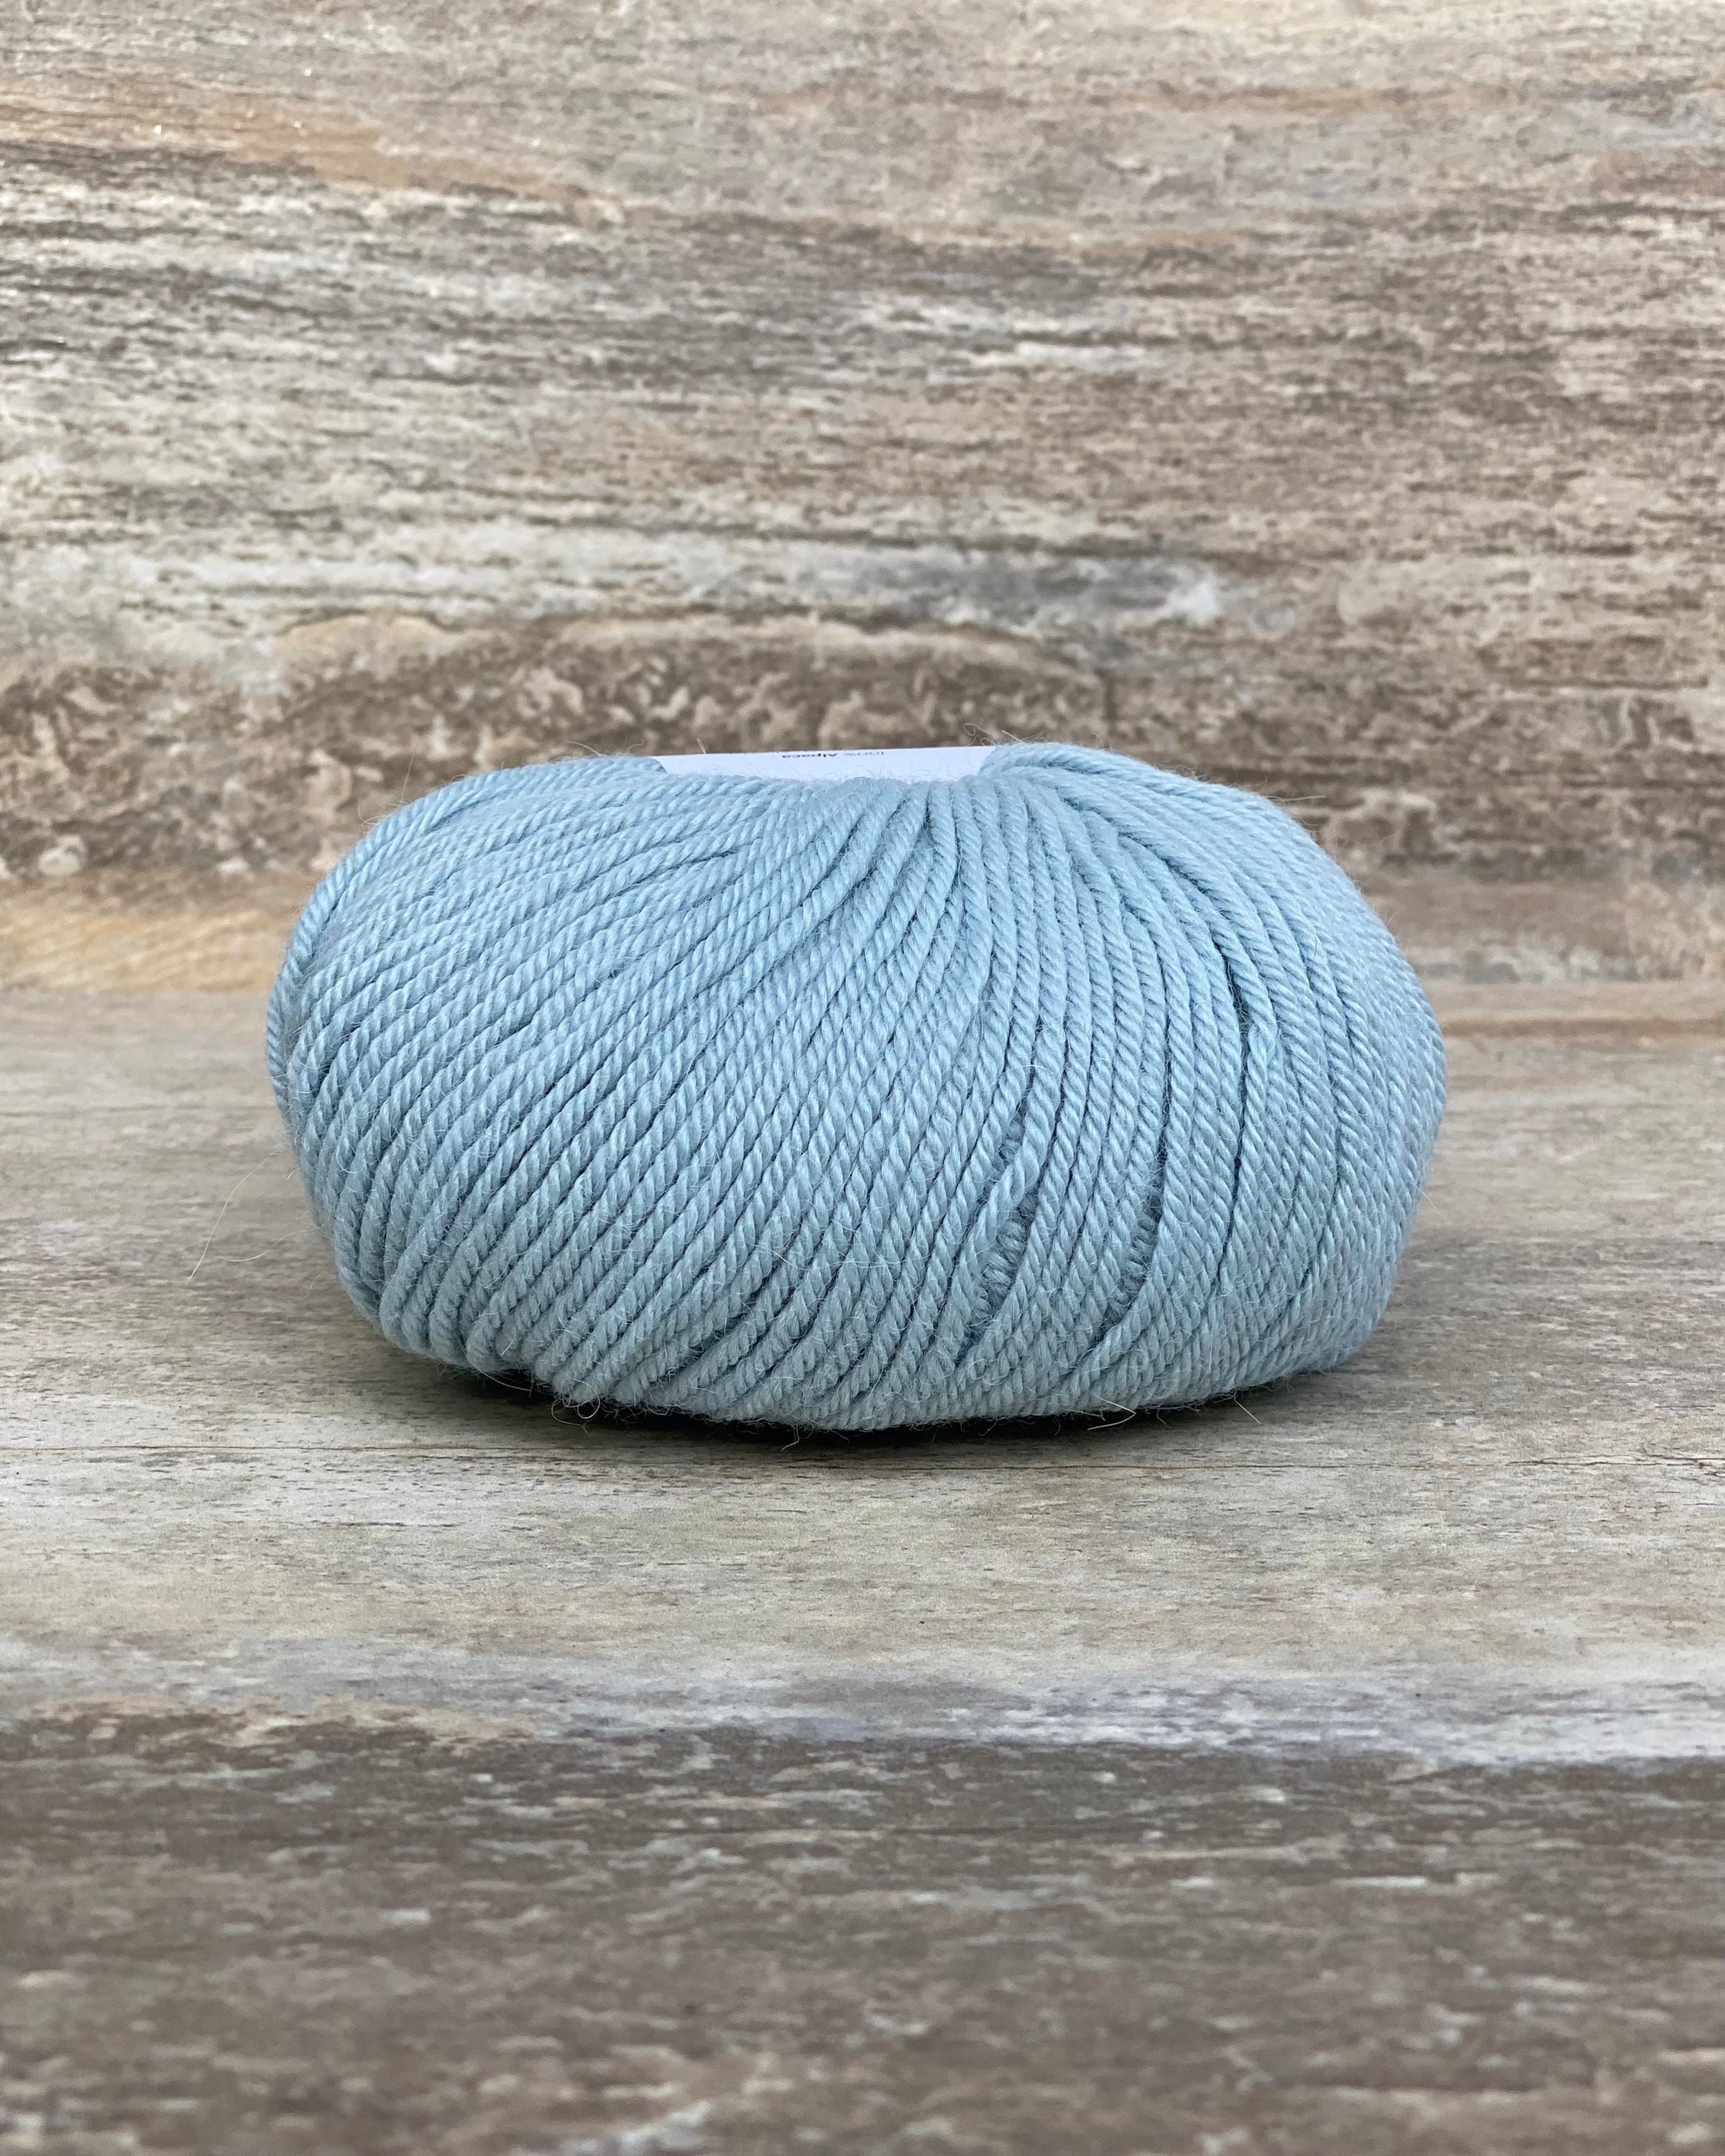 Light Blue Baby Alpaca Yarn from Peru for Crocheting or Knitting/ INDIECITA  Double Knitting Weight 3 Worsted Baby Alpaca Yarn for Blankets